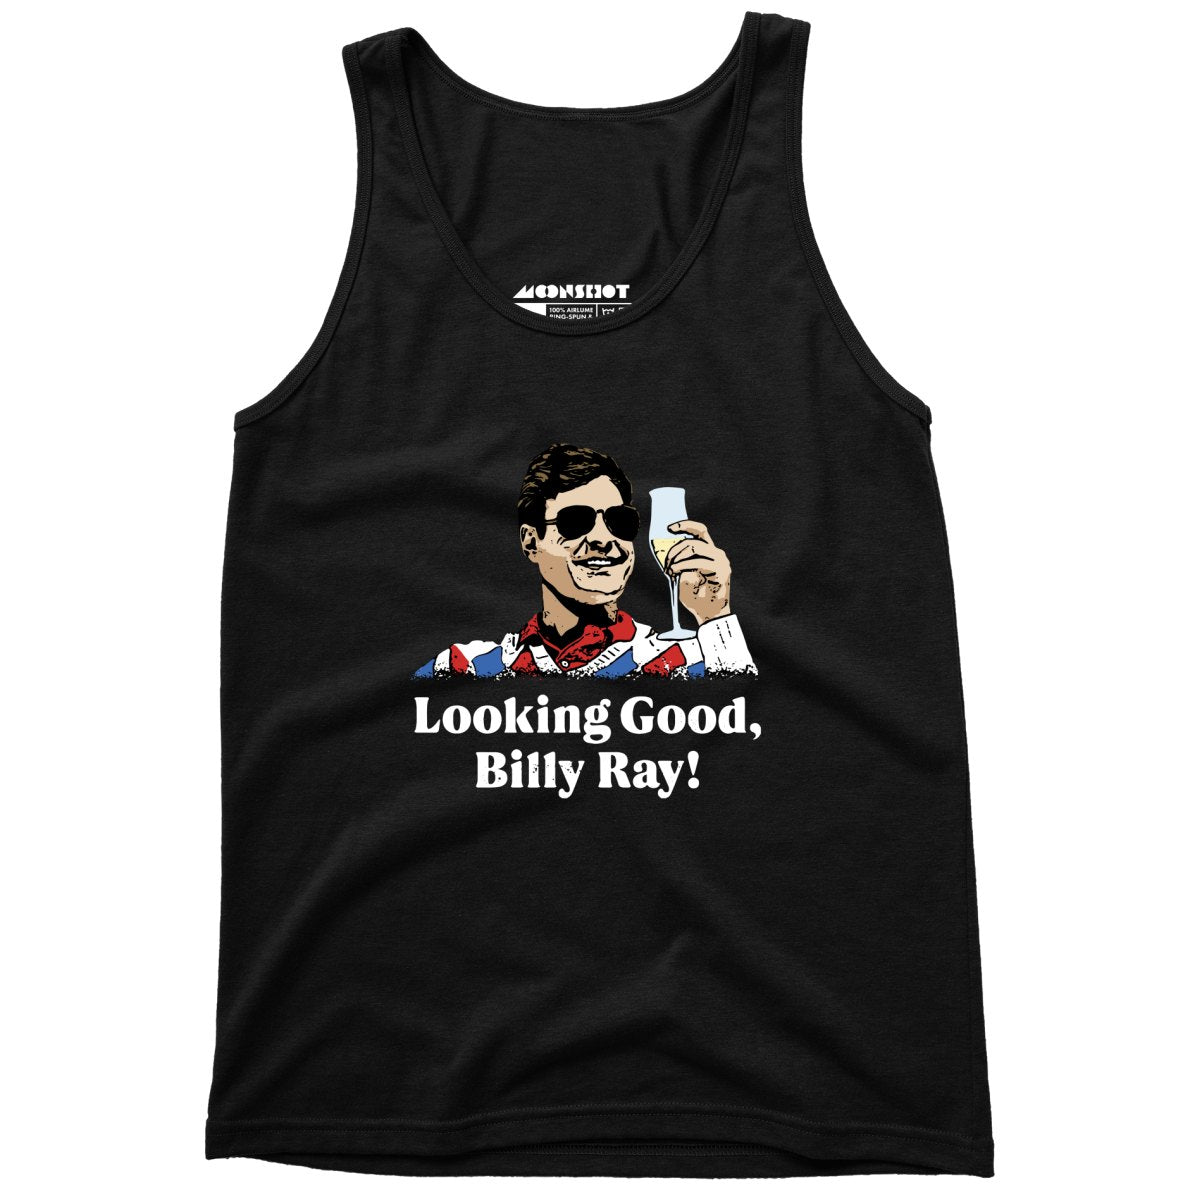 Looking Good, Billy Ray! - Unisex Tank Top